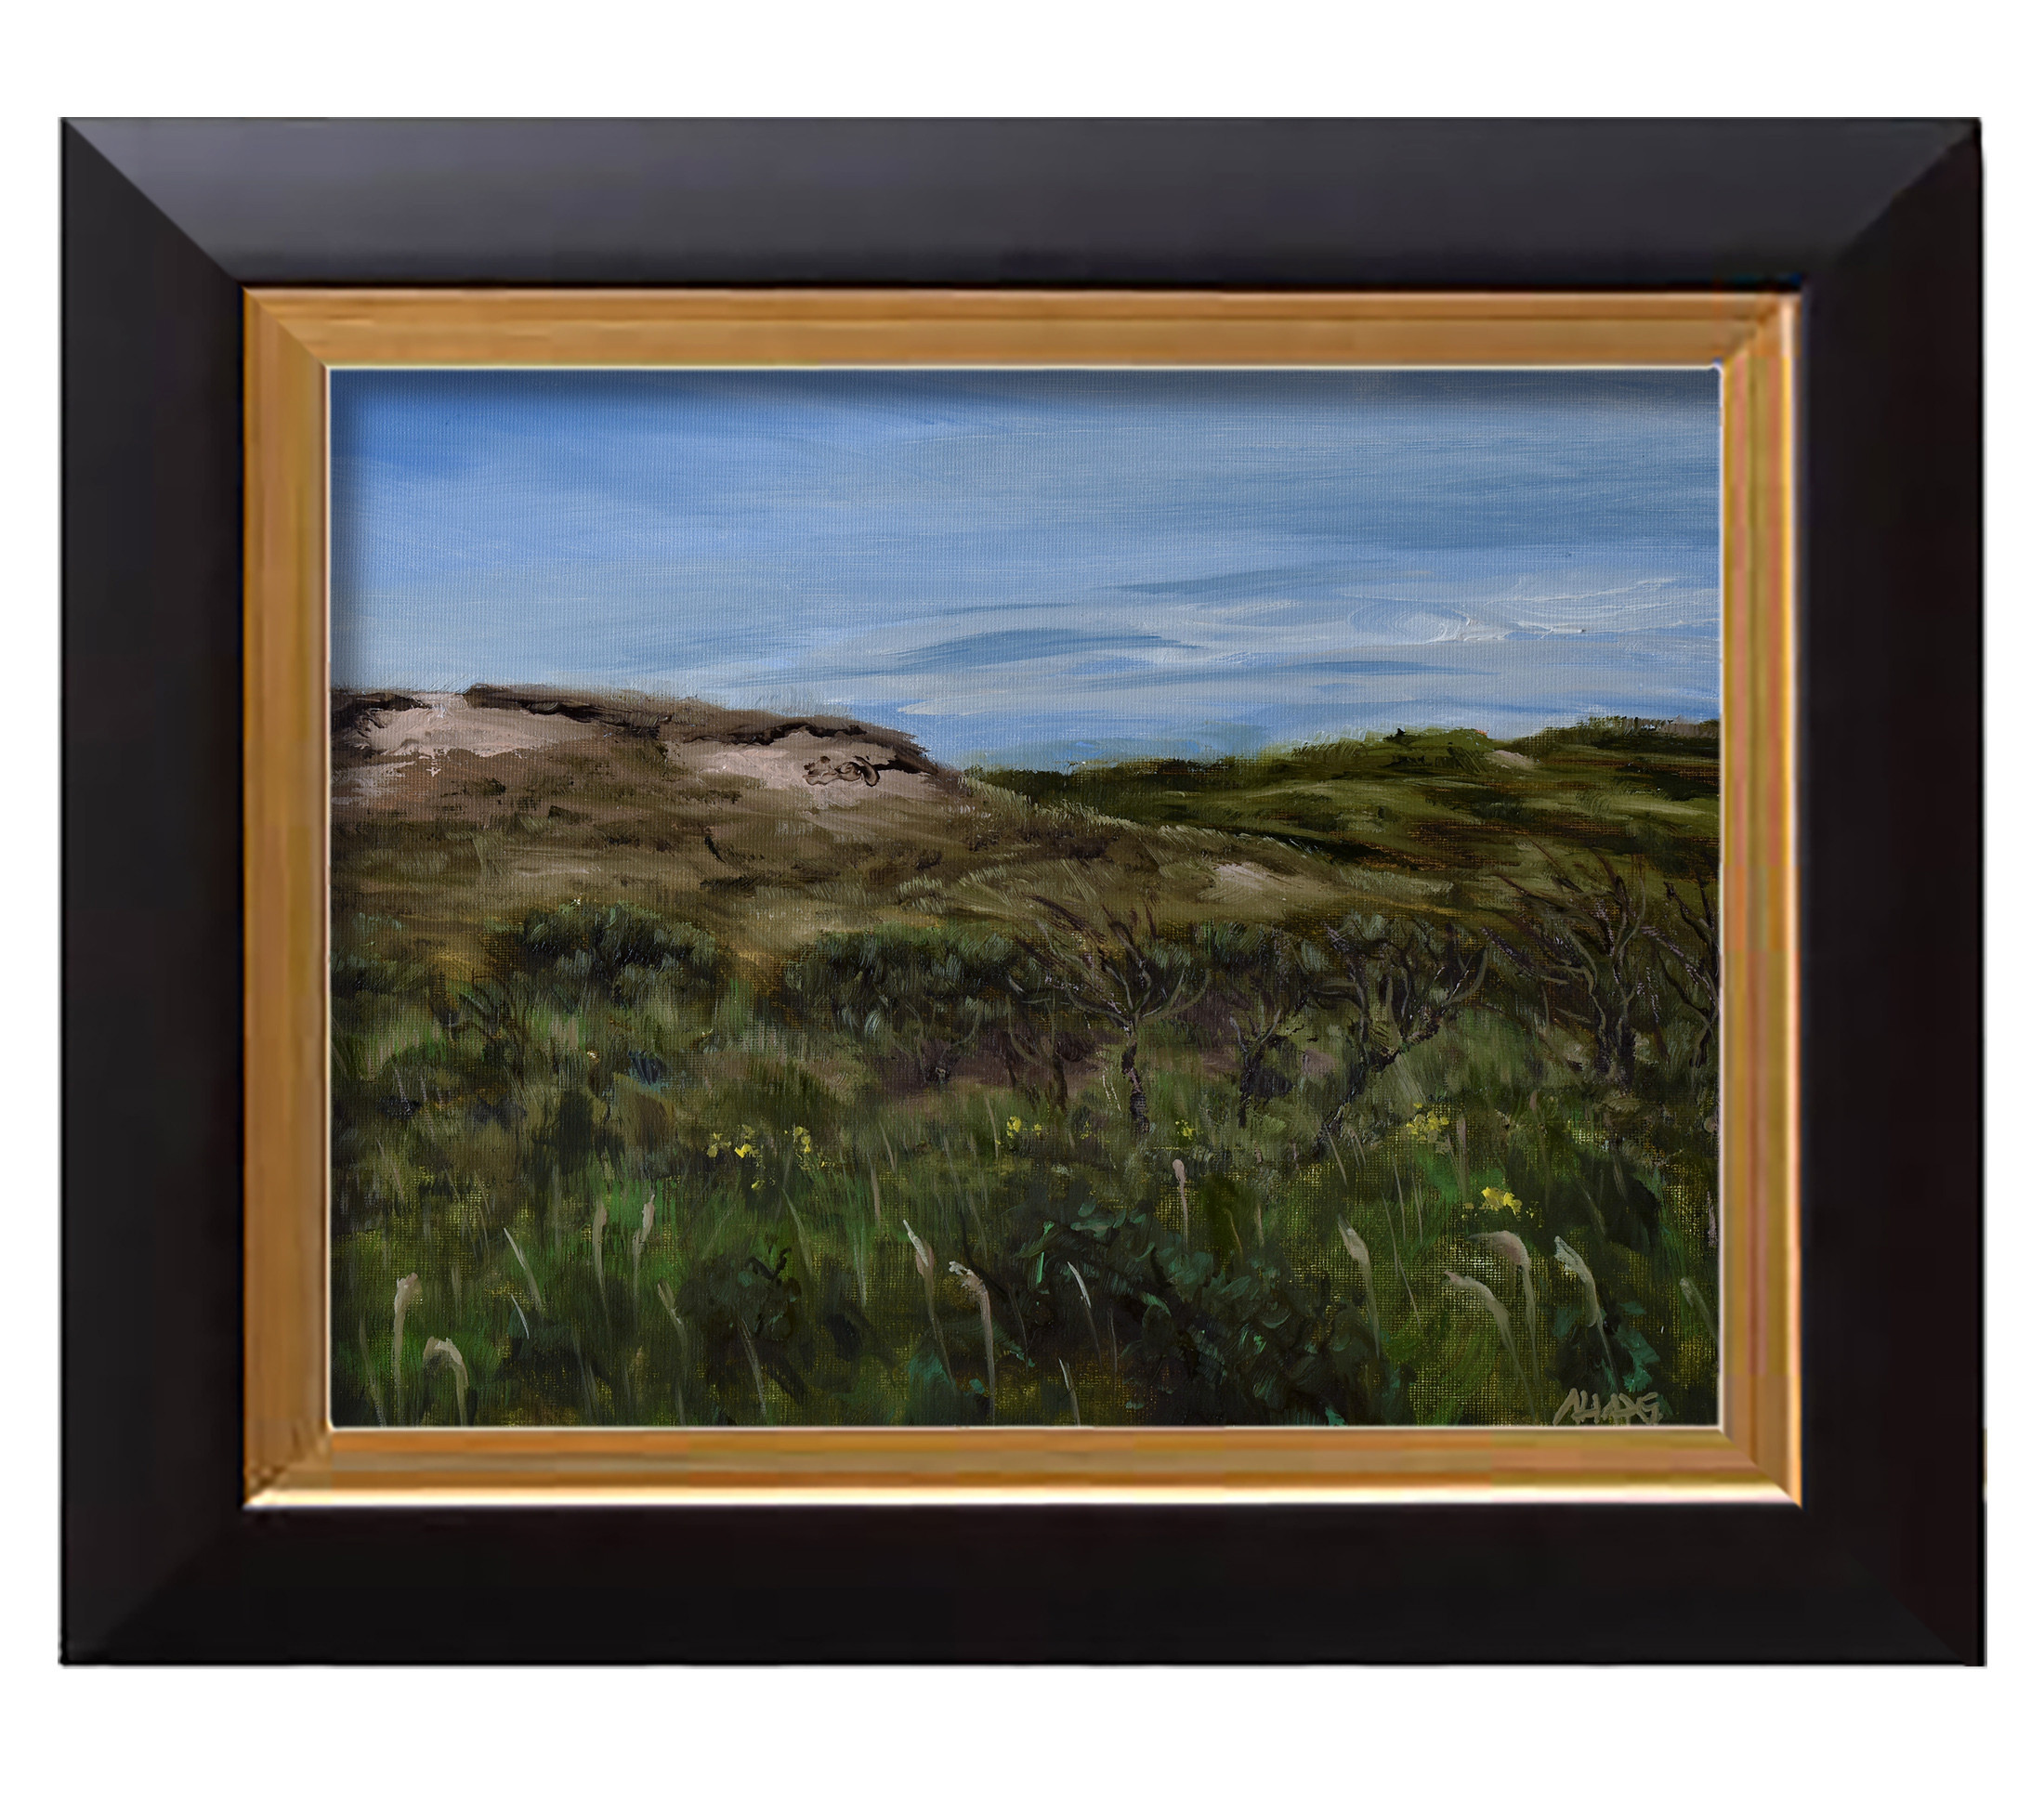 Dunes -for sale 9.4x11.8" (24x30cm) This one is for sale for € 350,-. This is with a frame and shipping included. It's painted on canvas on panel, is signed and varnished and is a unique item. It comes with a frame ready to be hanged.